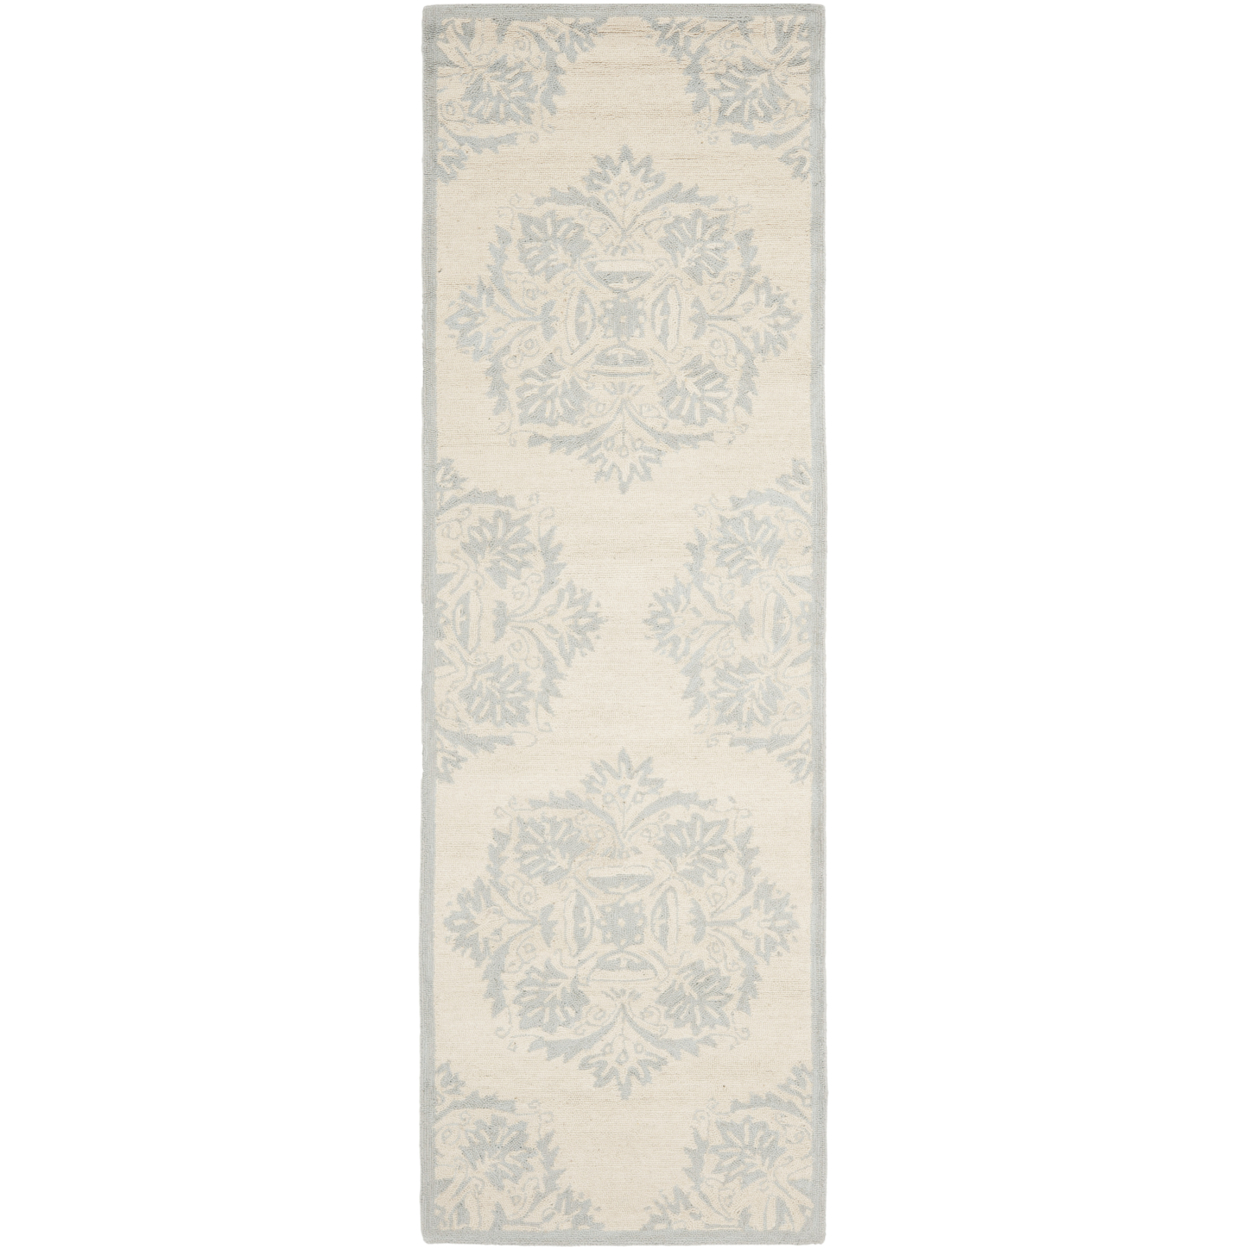 SAFAVIEH Chelsea HK359A Hand-hooked Ivory / Blue Rug - 2' 6 X 6'